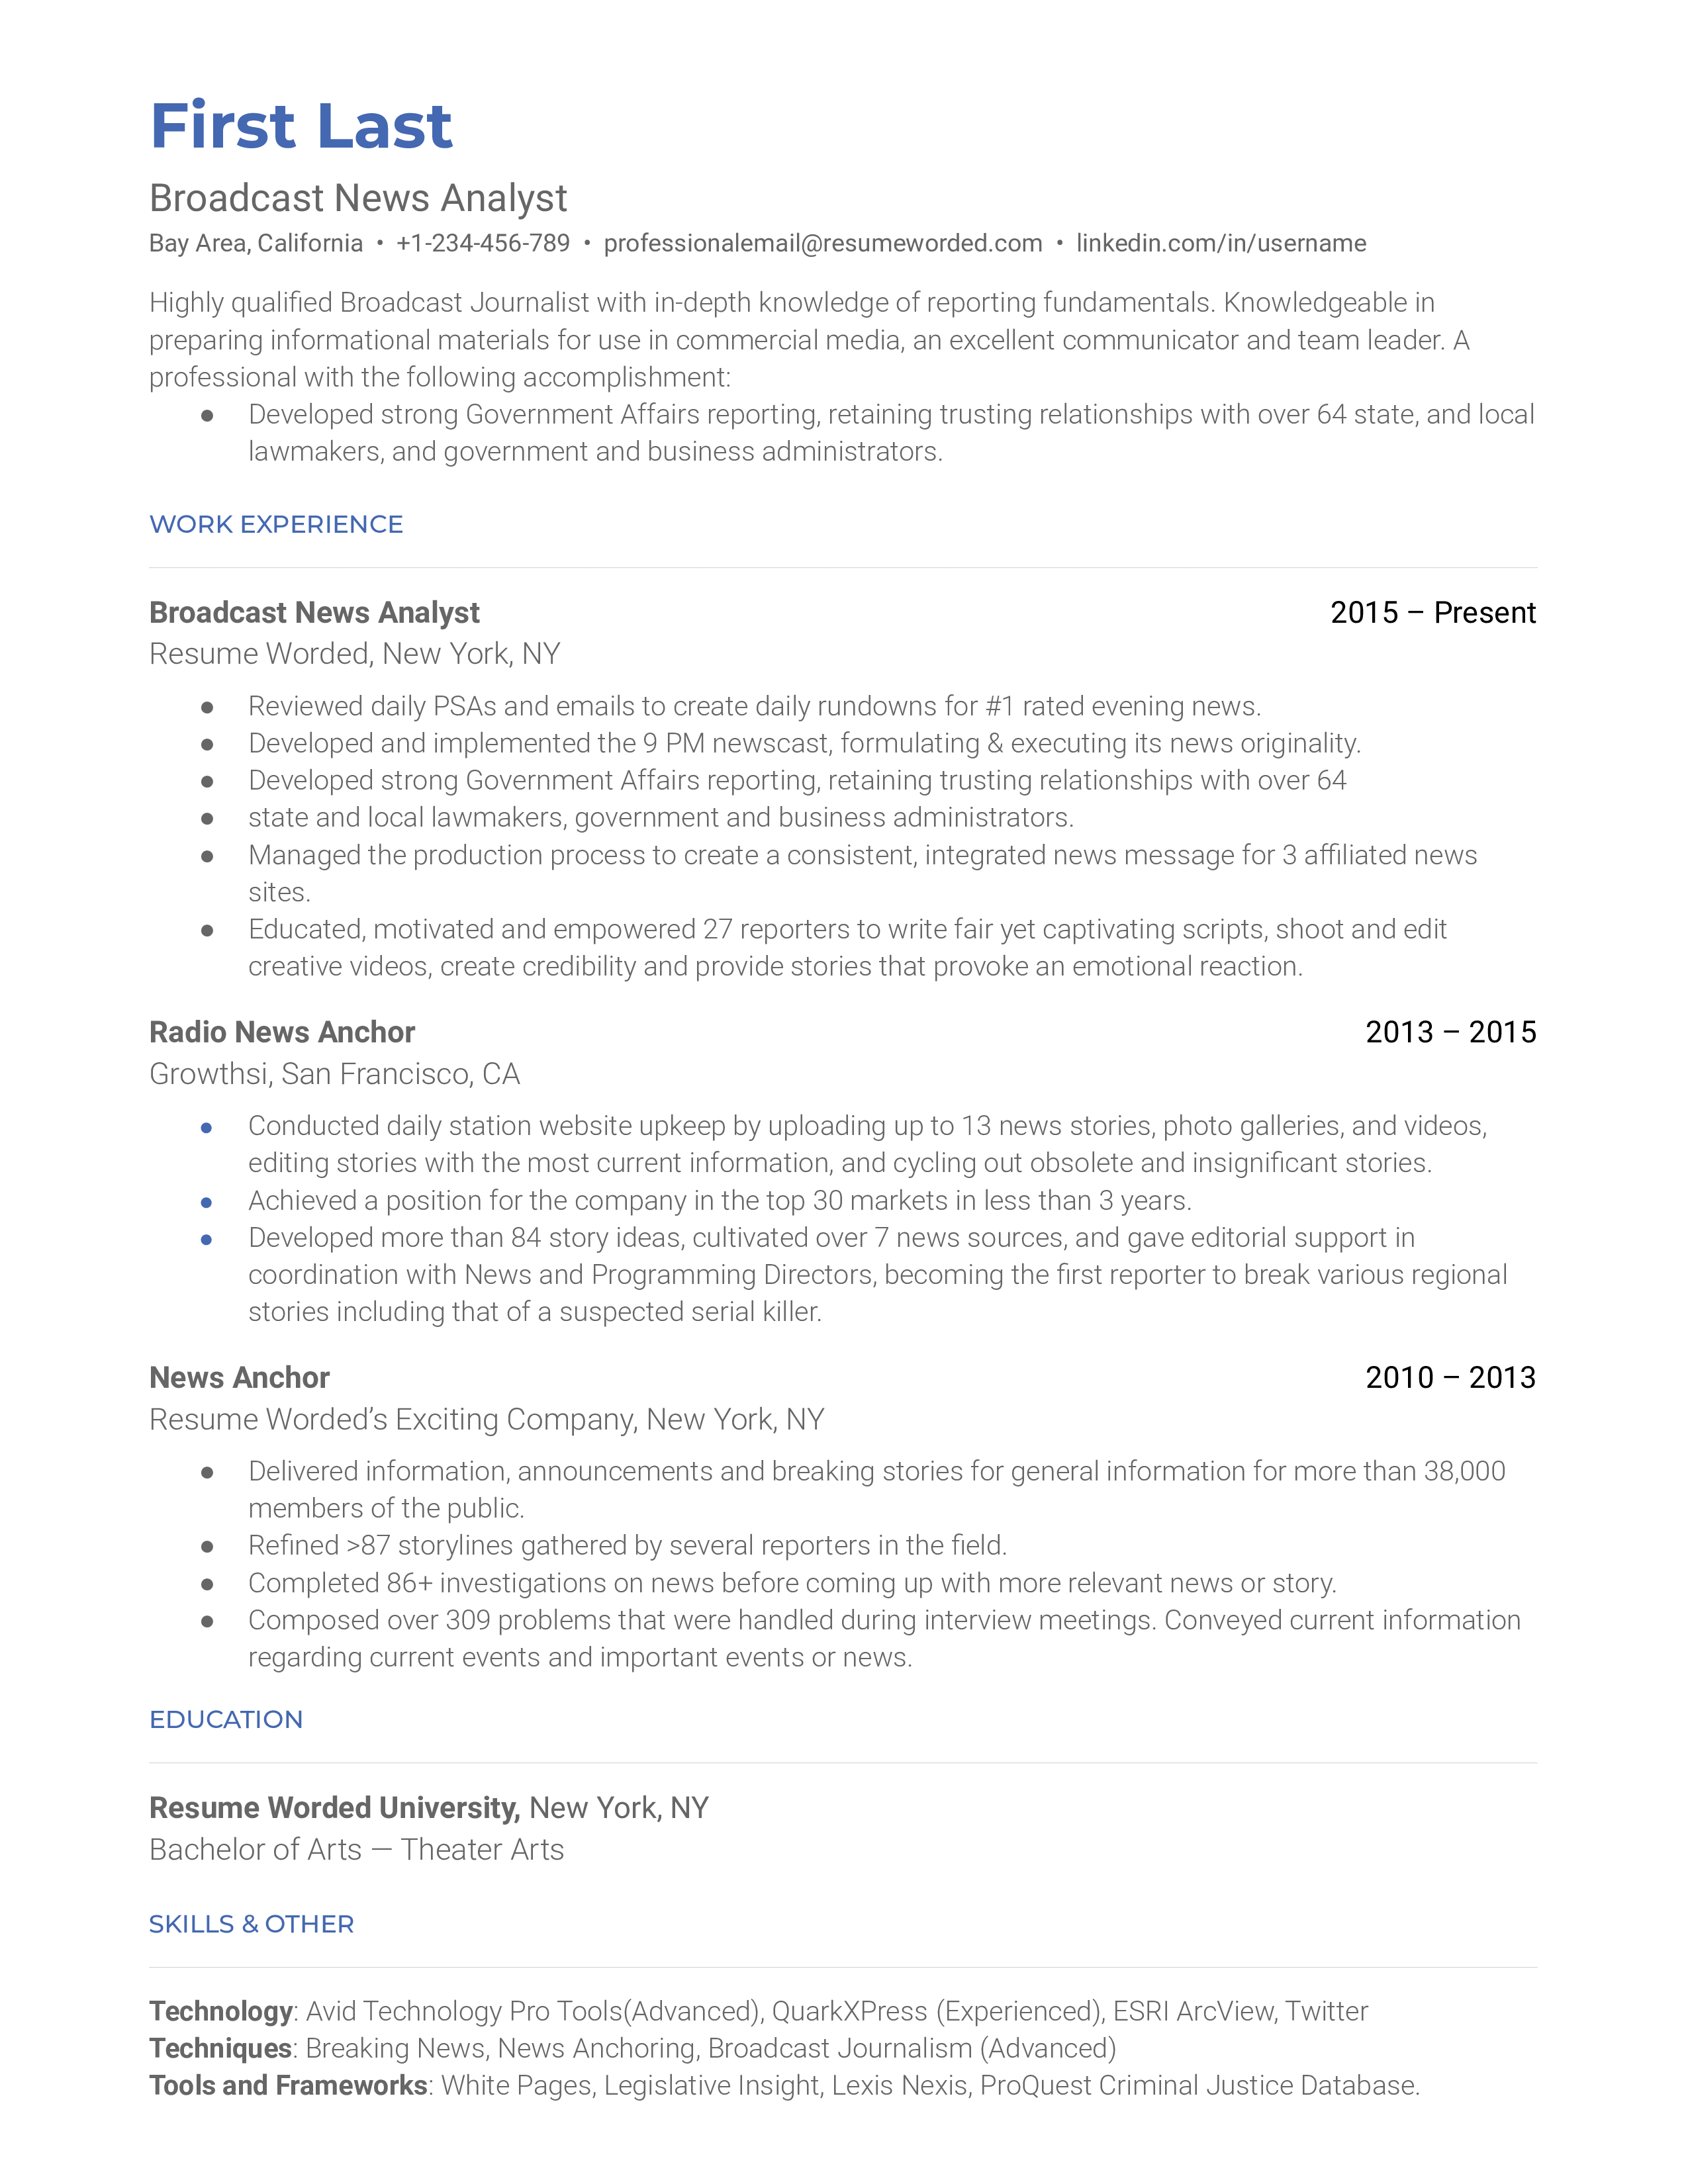 Professional CV of a Broadcast News Analyst with emphasis on digital proficiency and communication skills